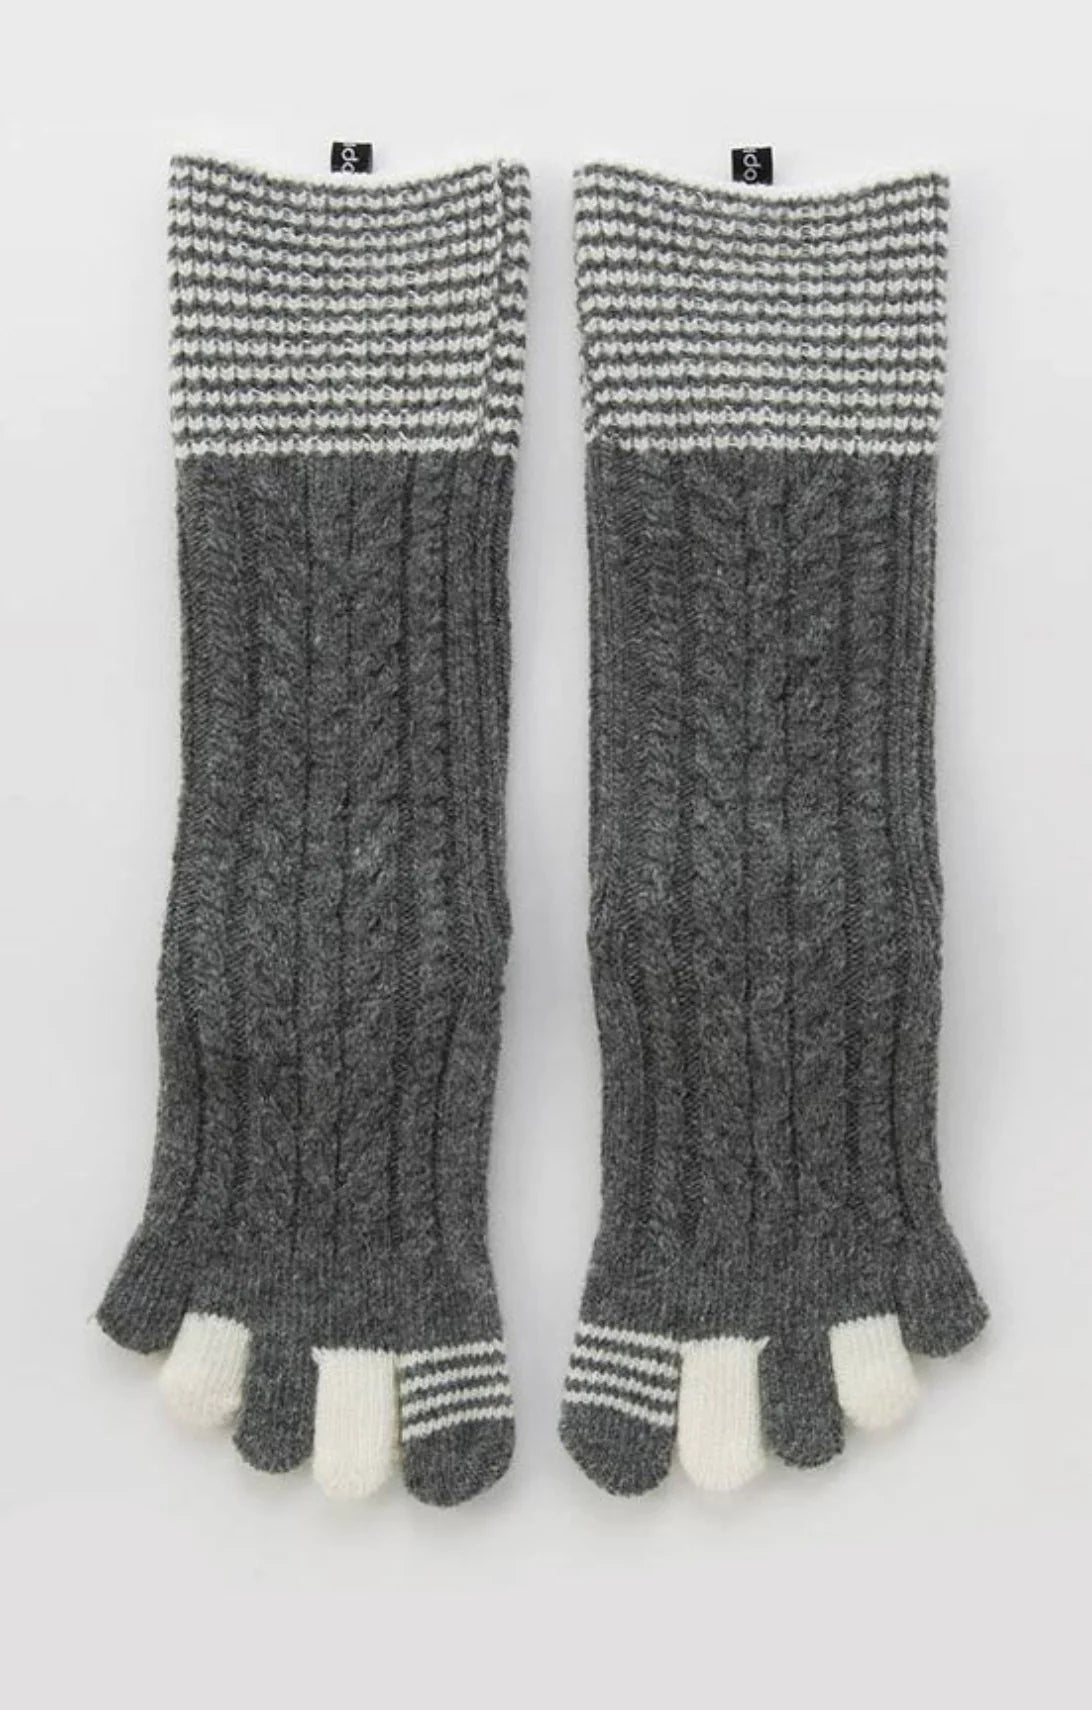 Frontal view of Knitido plus's Wool Blend Cable Striped Midcalf Toe Socks in GREY color